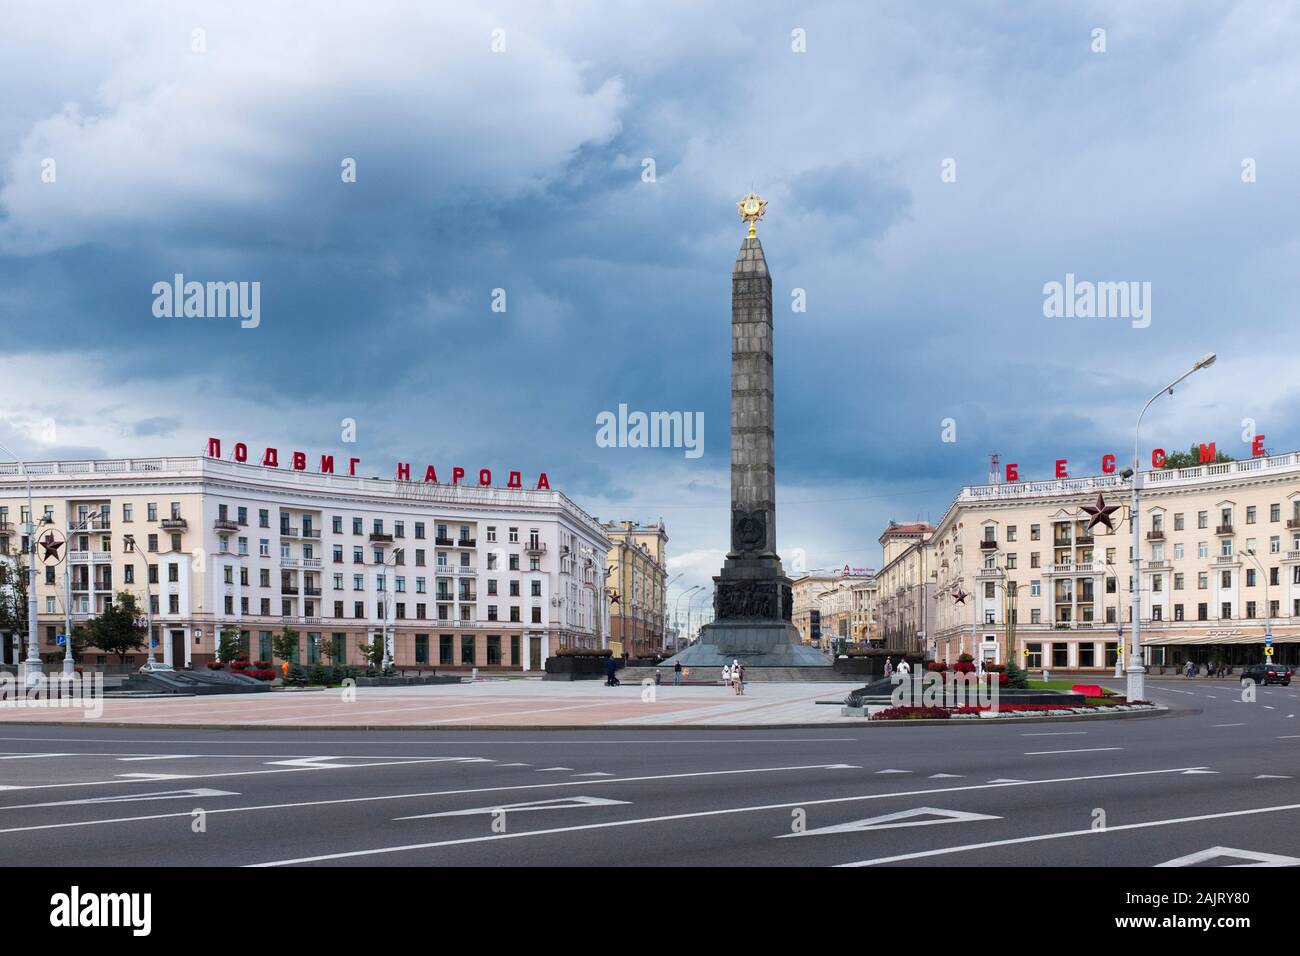 Victory square is often referred to one of the most iconic of many former soviet city centers, centered around the victory monument. Minsk Belarus Stock Photo